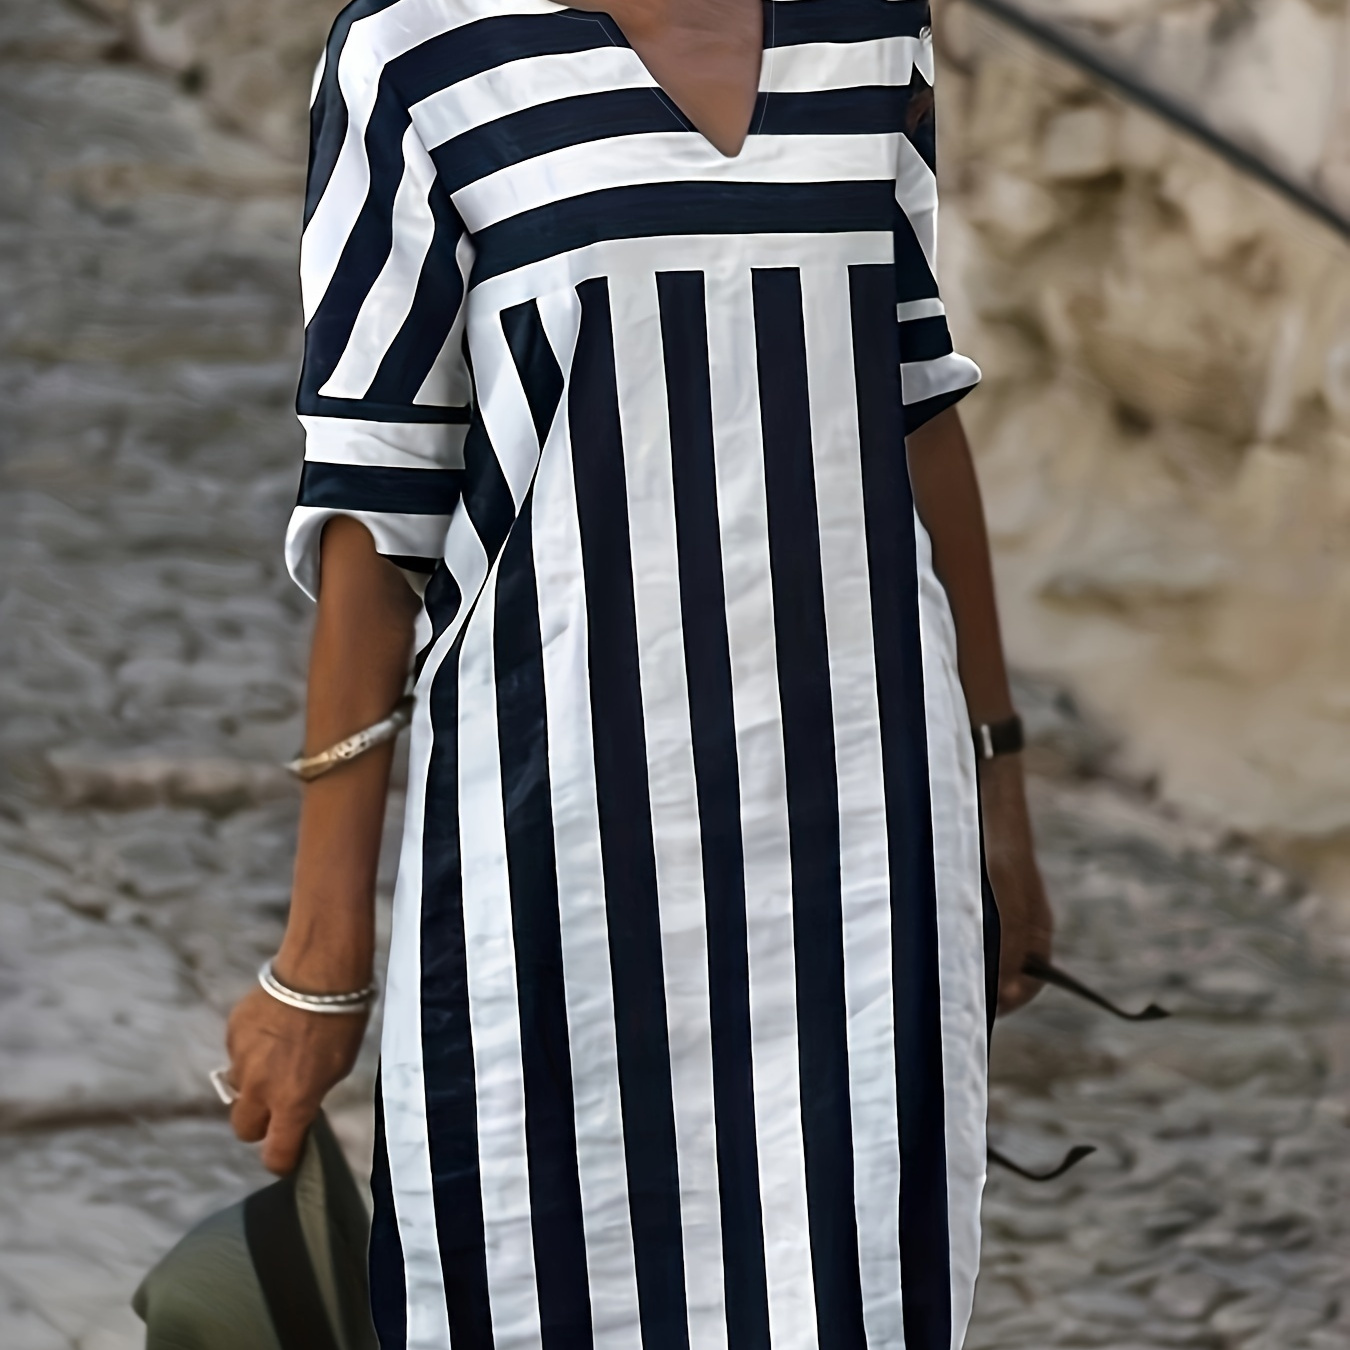 

Striped Print Simple Dress, Casual Notched Neck Half Sleeve Dress, Women's Clothing